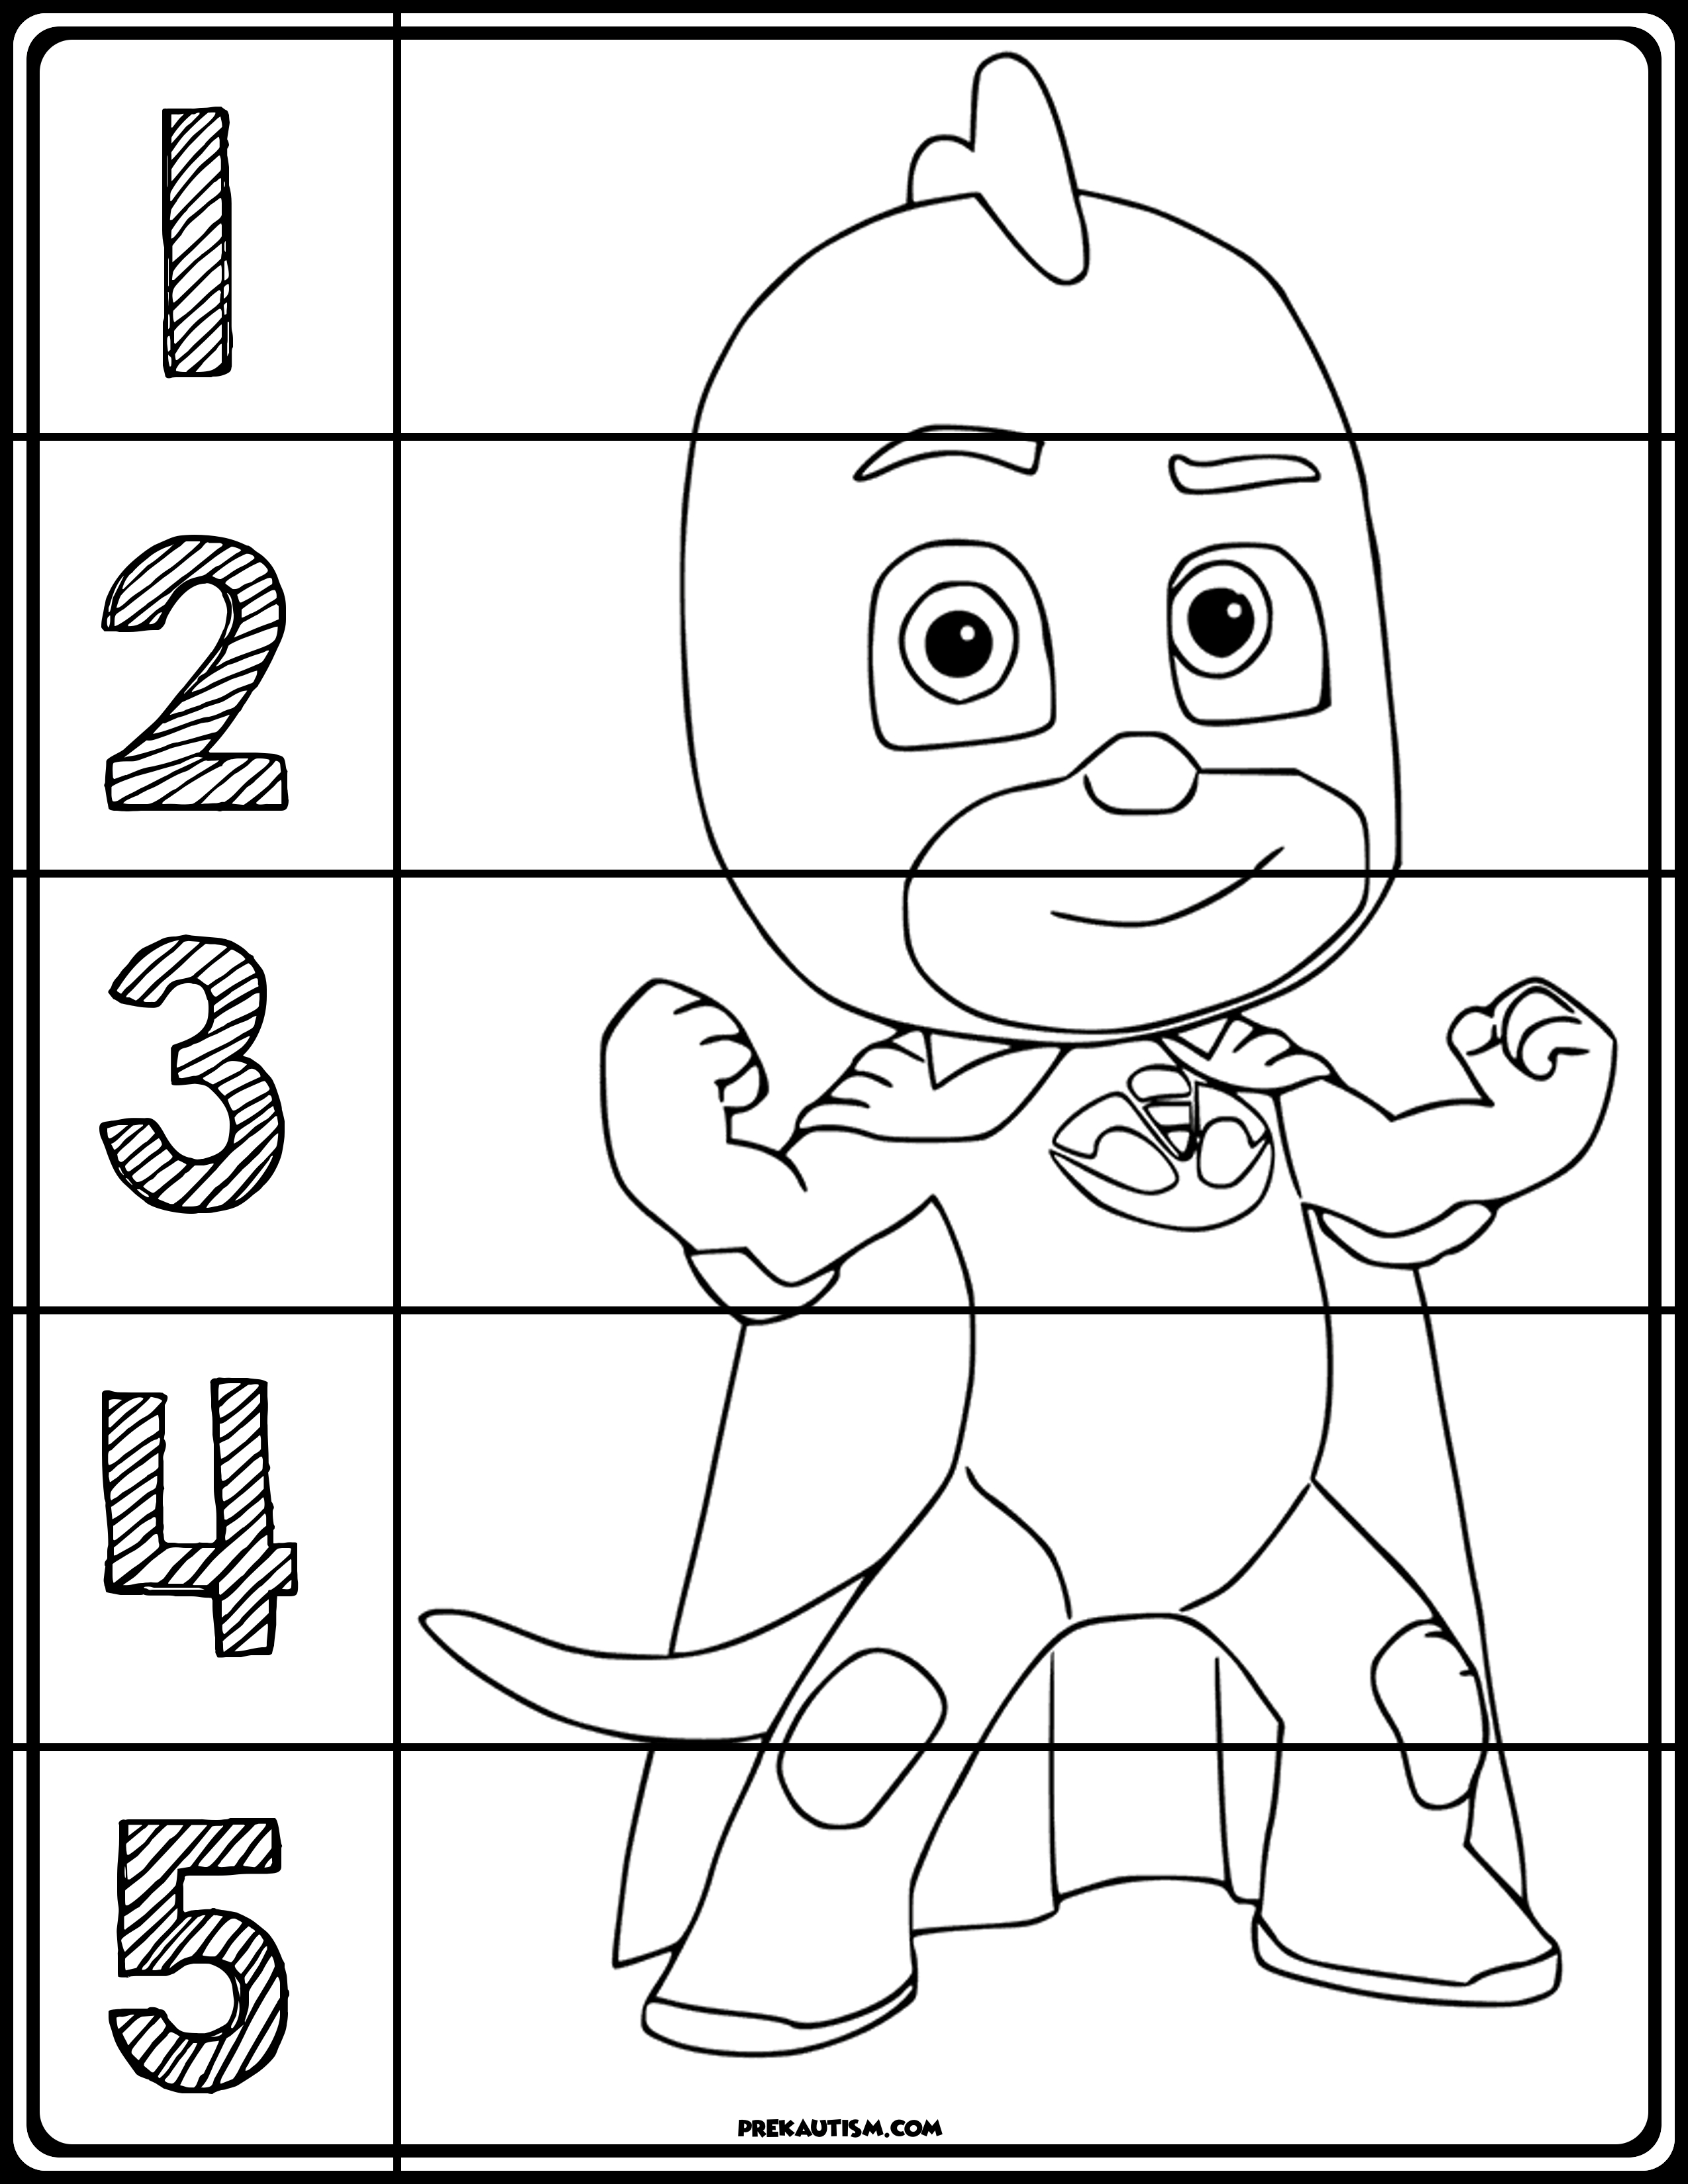 Pj Masks Coloring Number Puzzles | My Tpt Store | Pj Mask, Numbers - Printable Face Puzzle